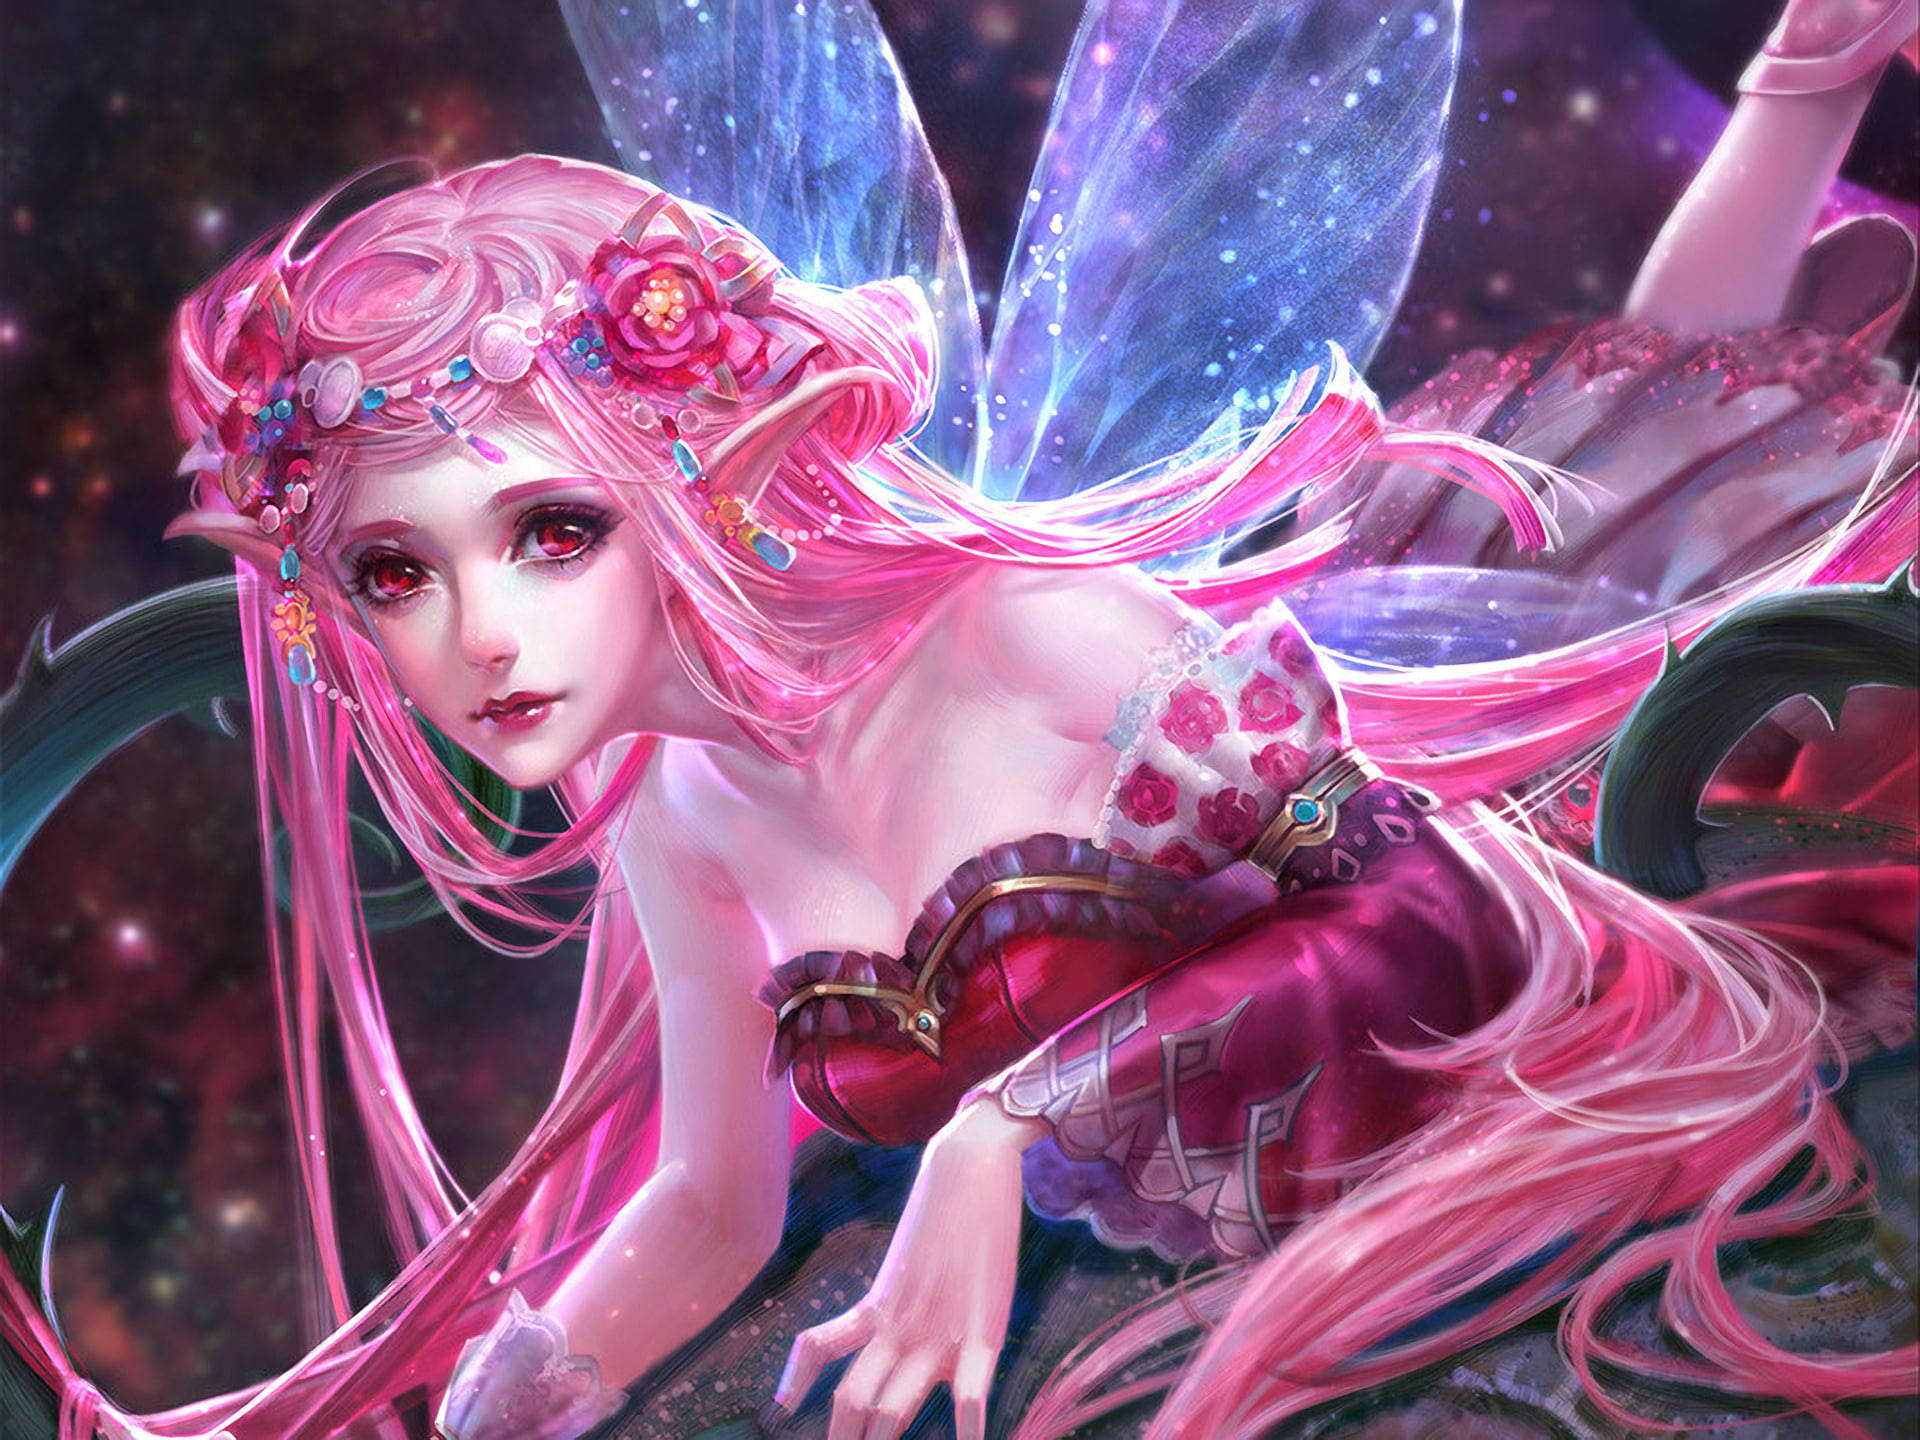 Free Fairy Wallpaper Downloads, [200+] Fairy Wallpapers for FREE |  